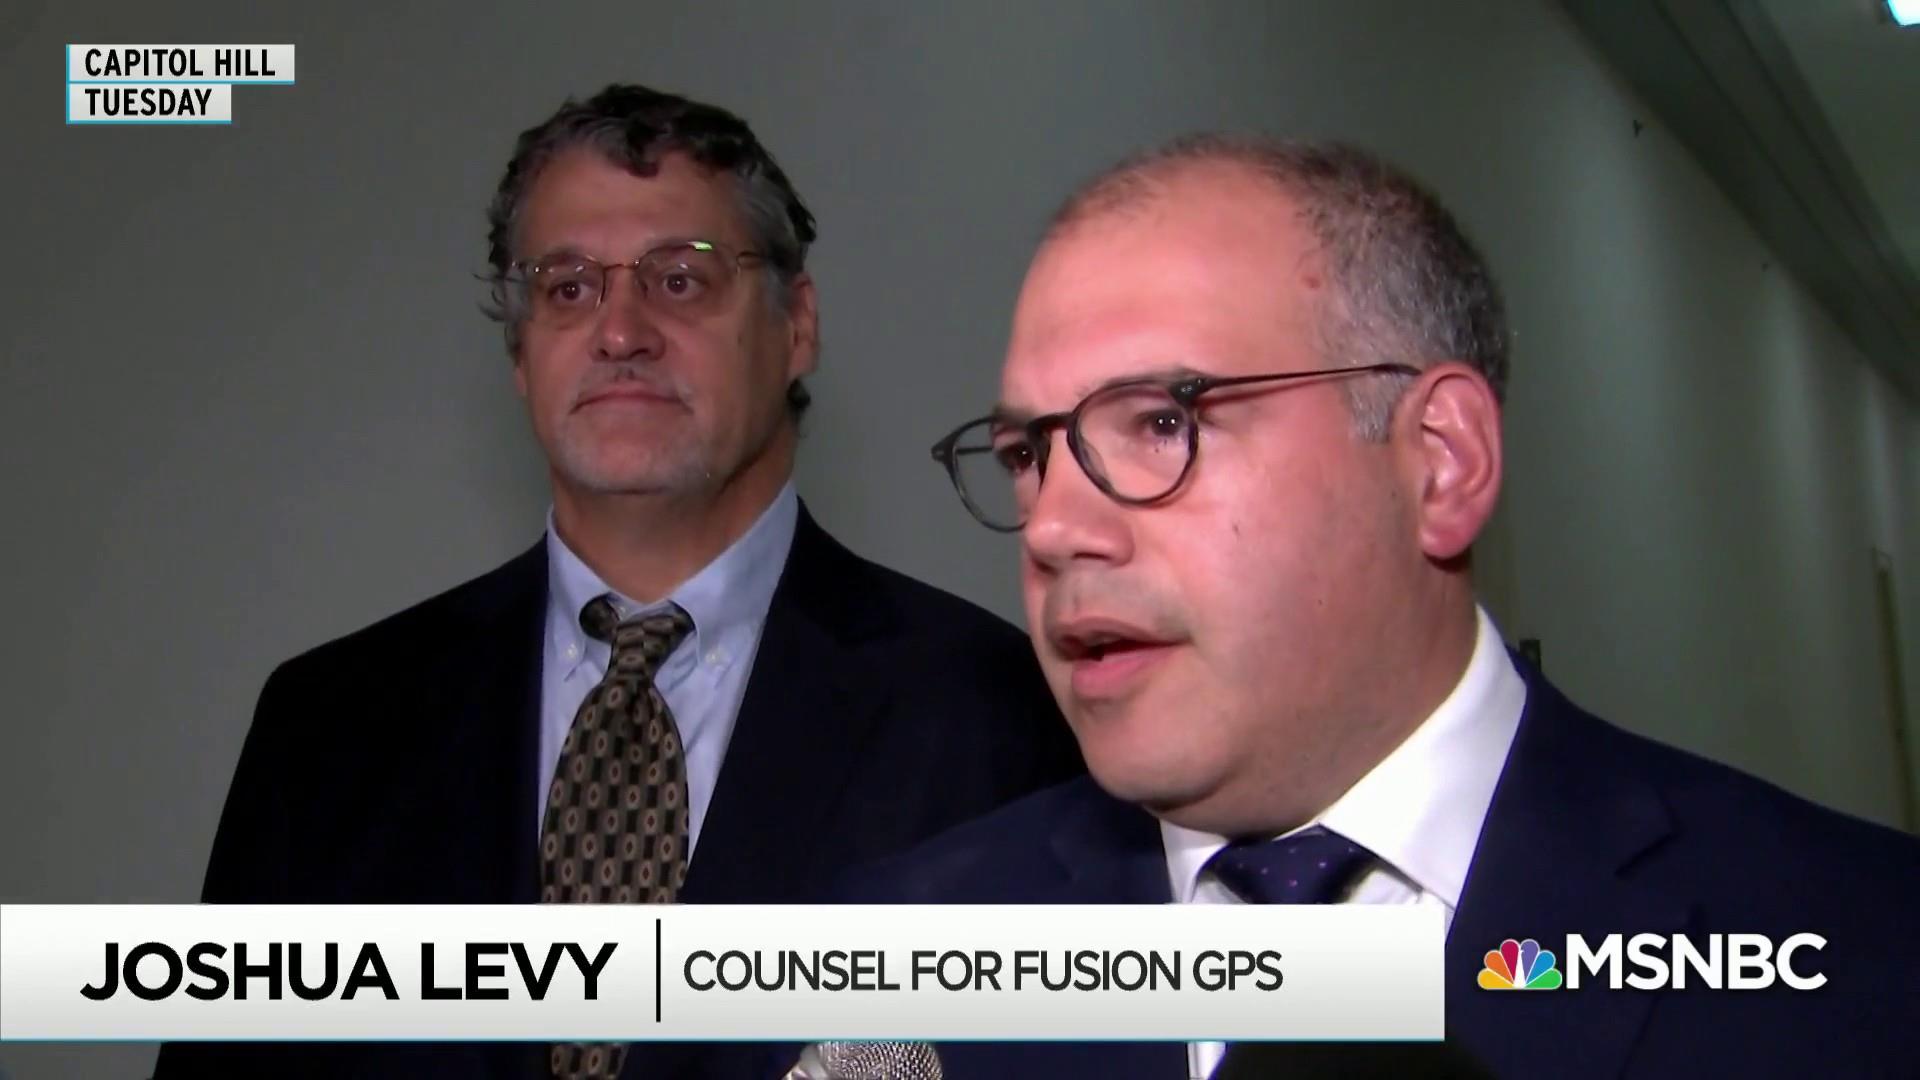 Dossier nit-pickers miss the big picture: Fusion GPS attorney